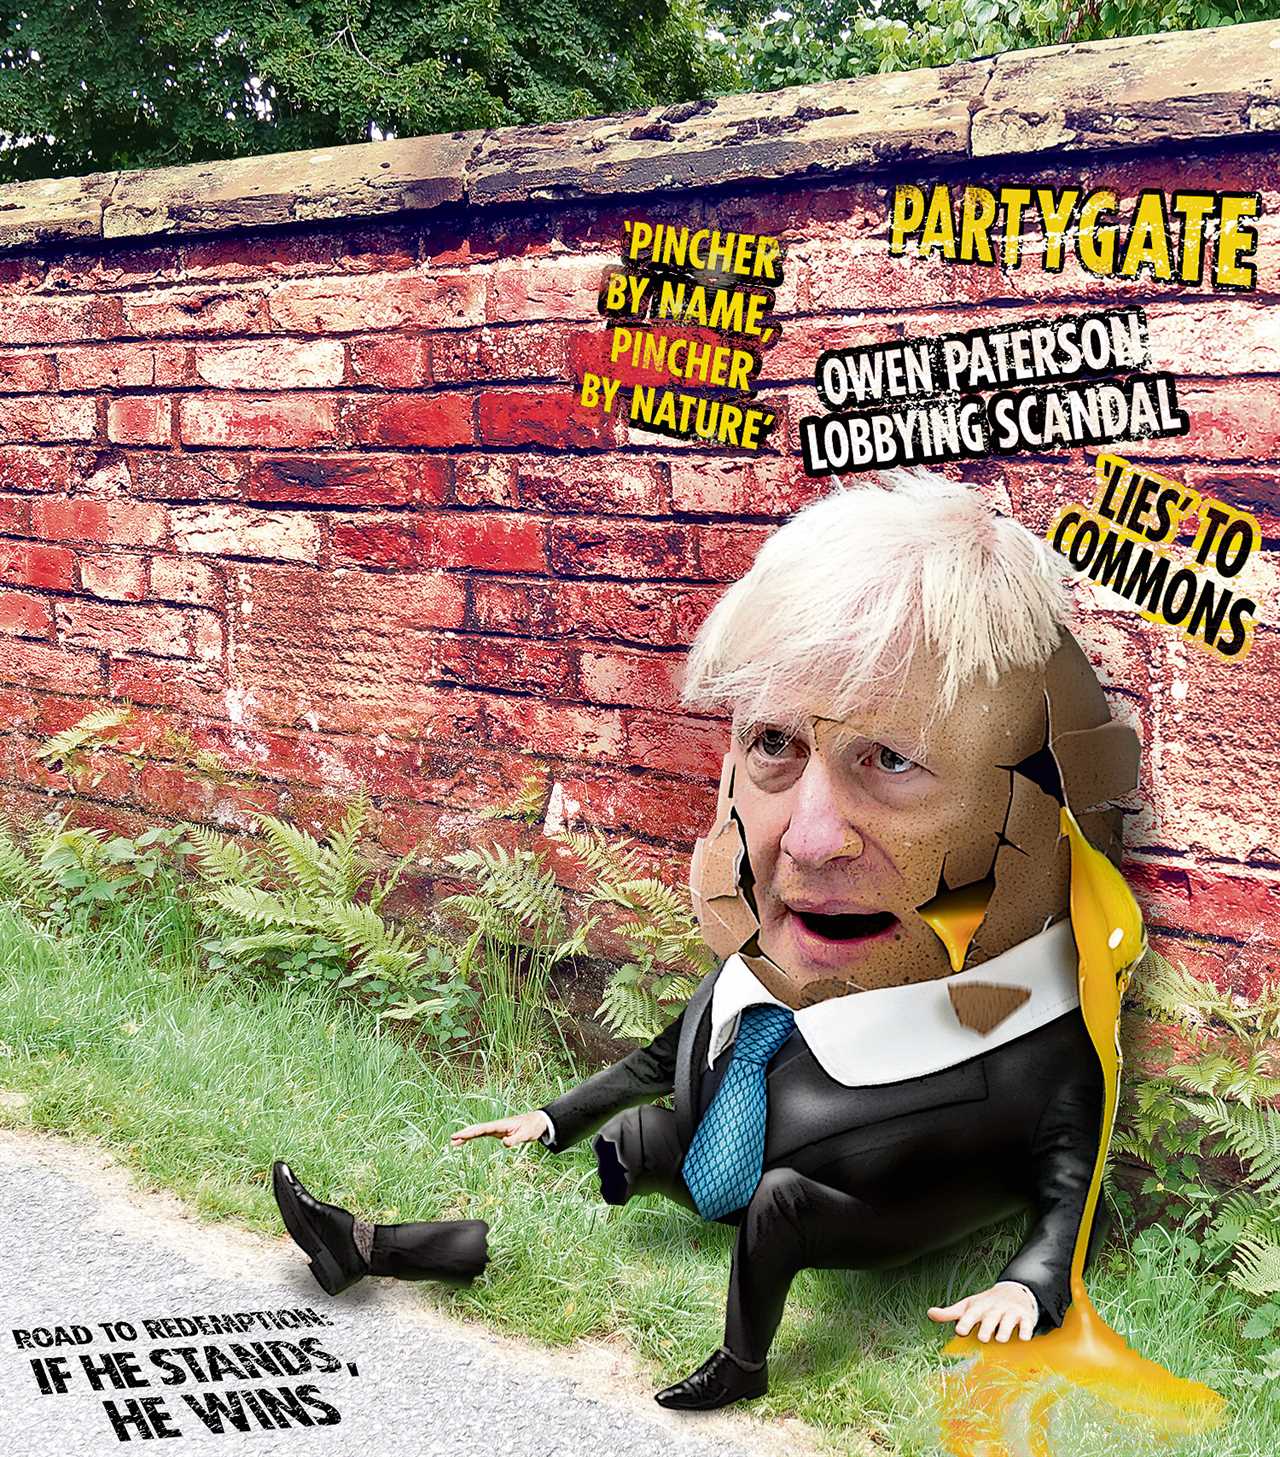 Boris Johnson is a political Humpty Dumpty with a giant ego who had such a great fall – but if he runs for PM, he’ll win